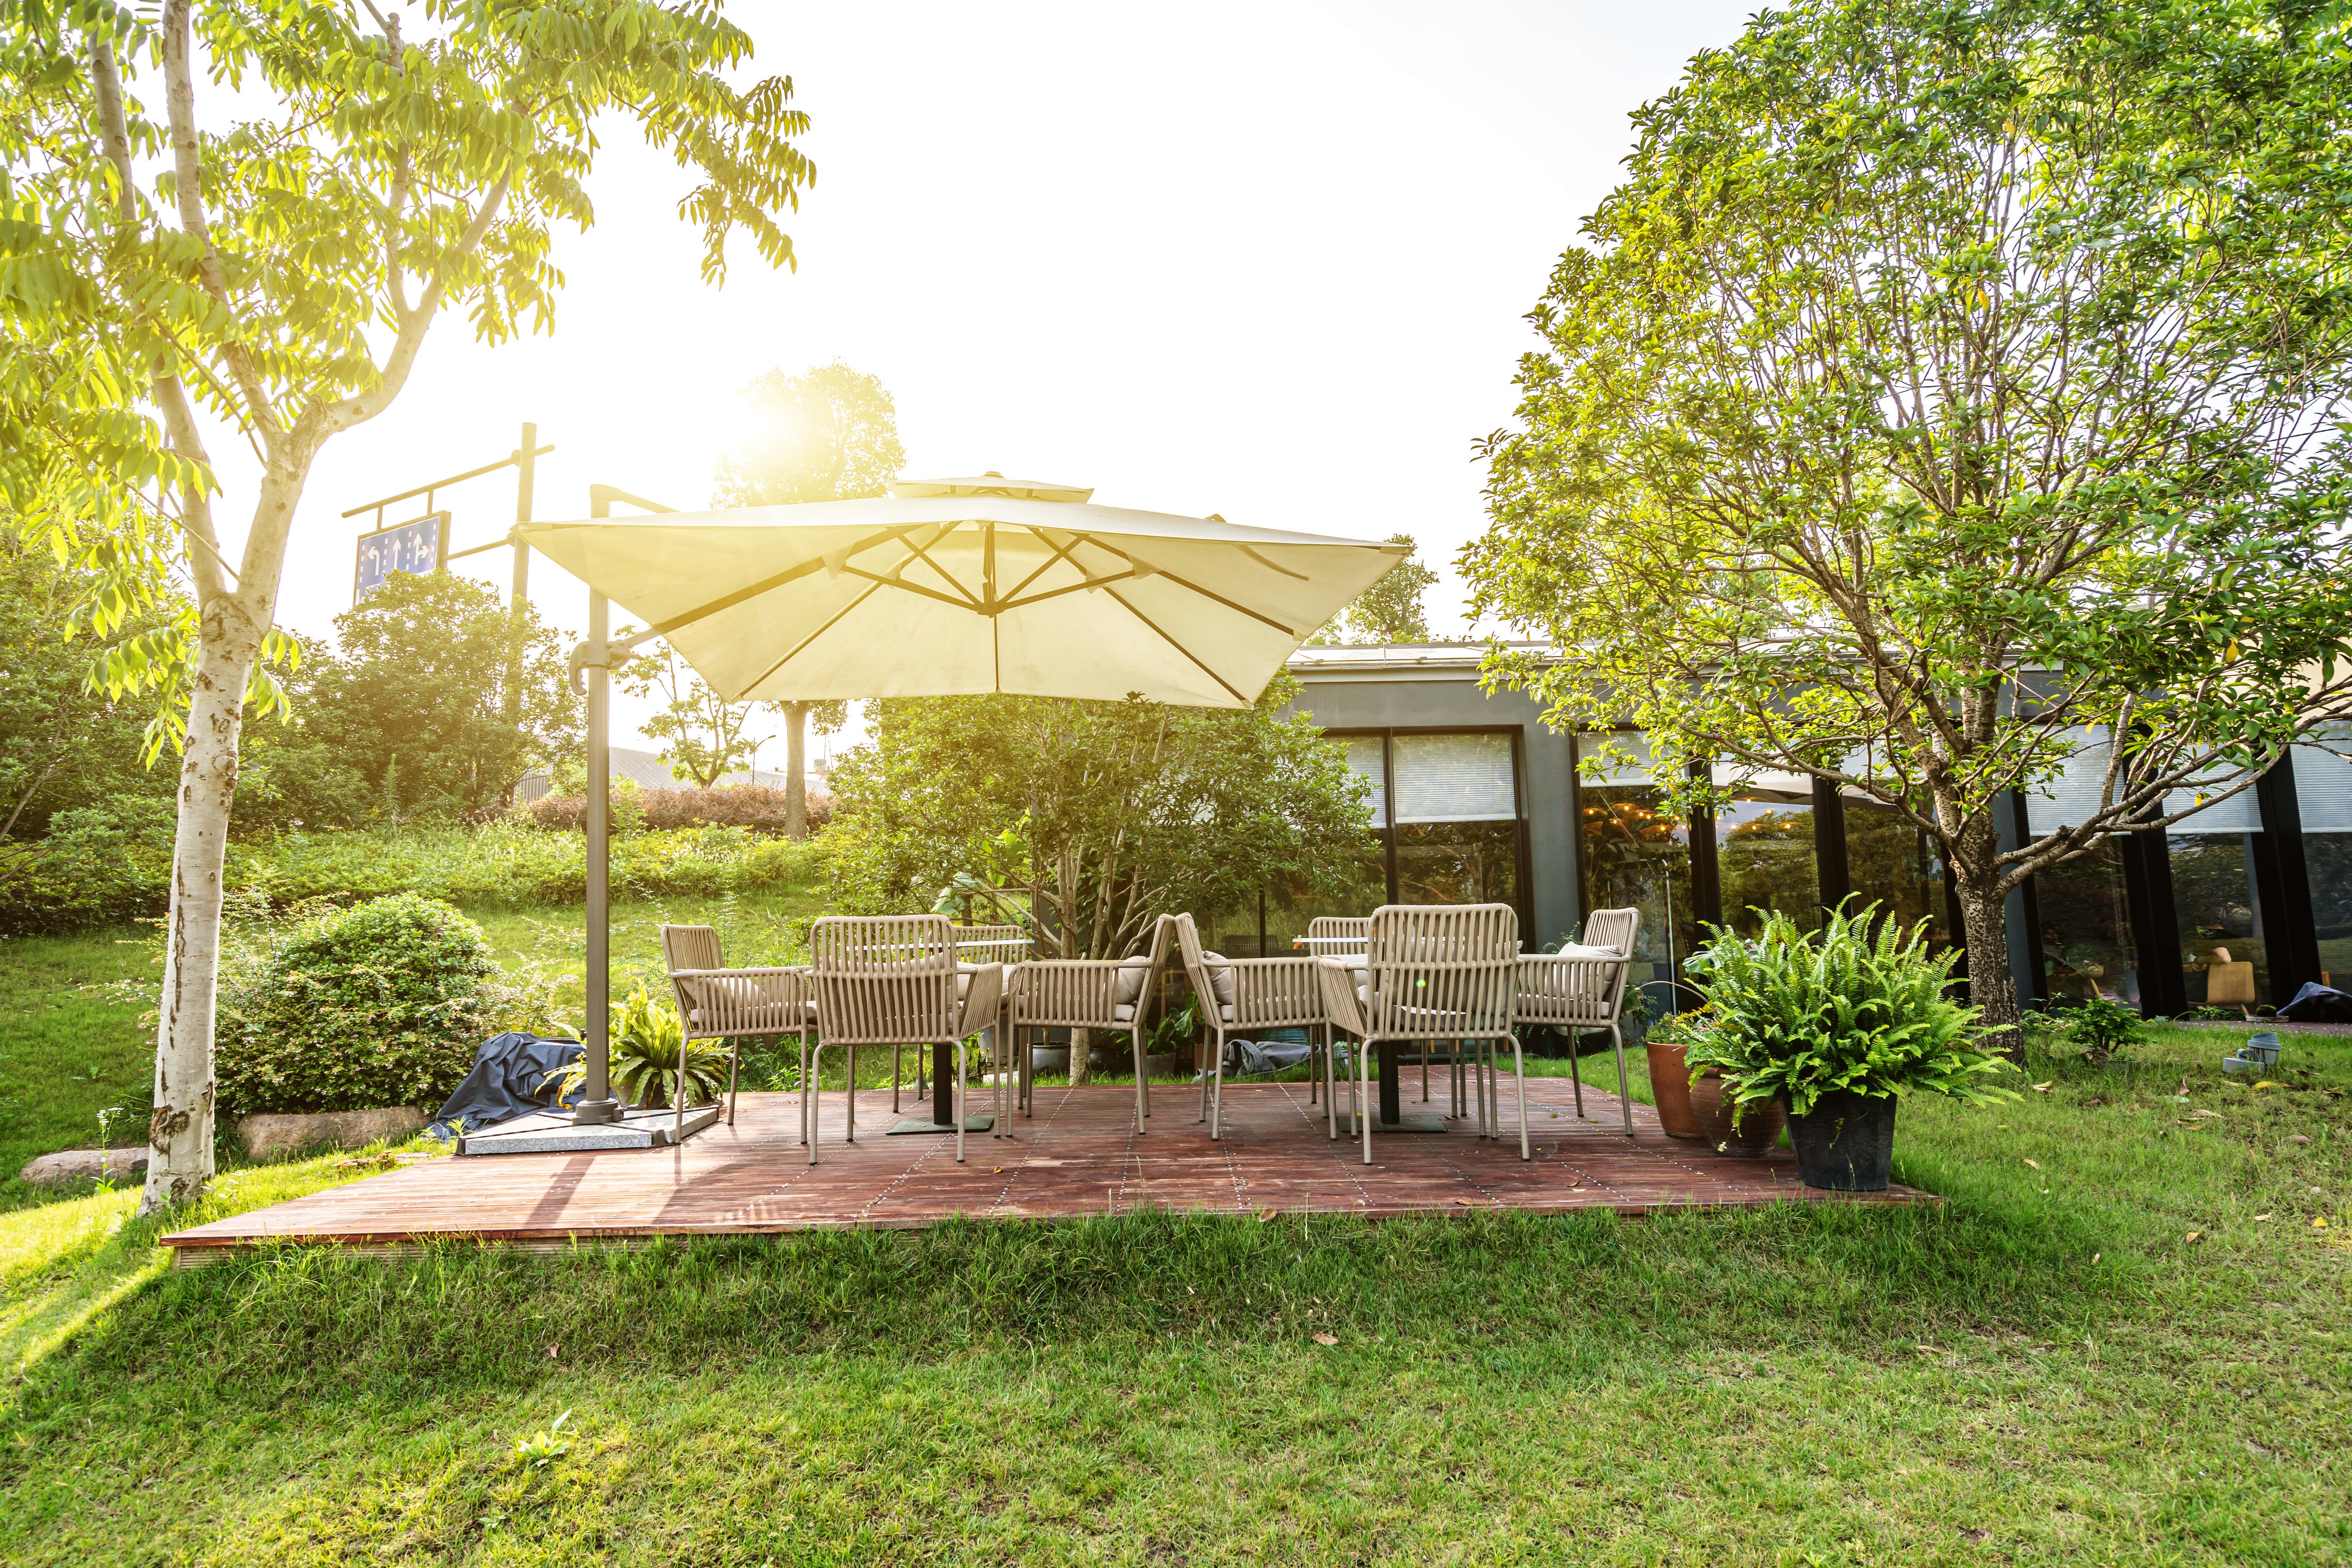 an image of a nicely landscaped yard with a patio full of table and chairs